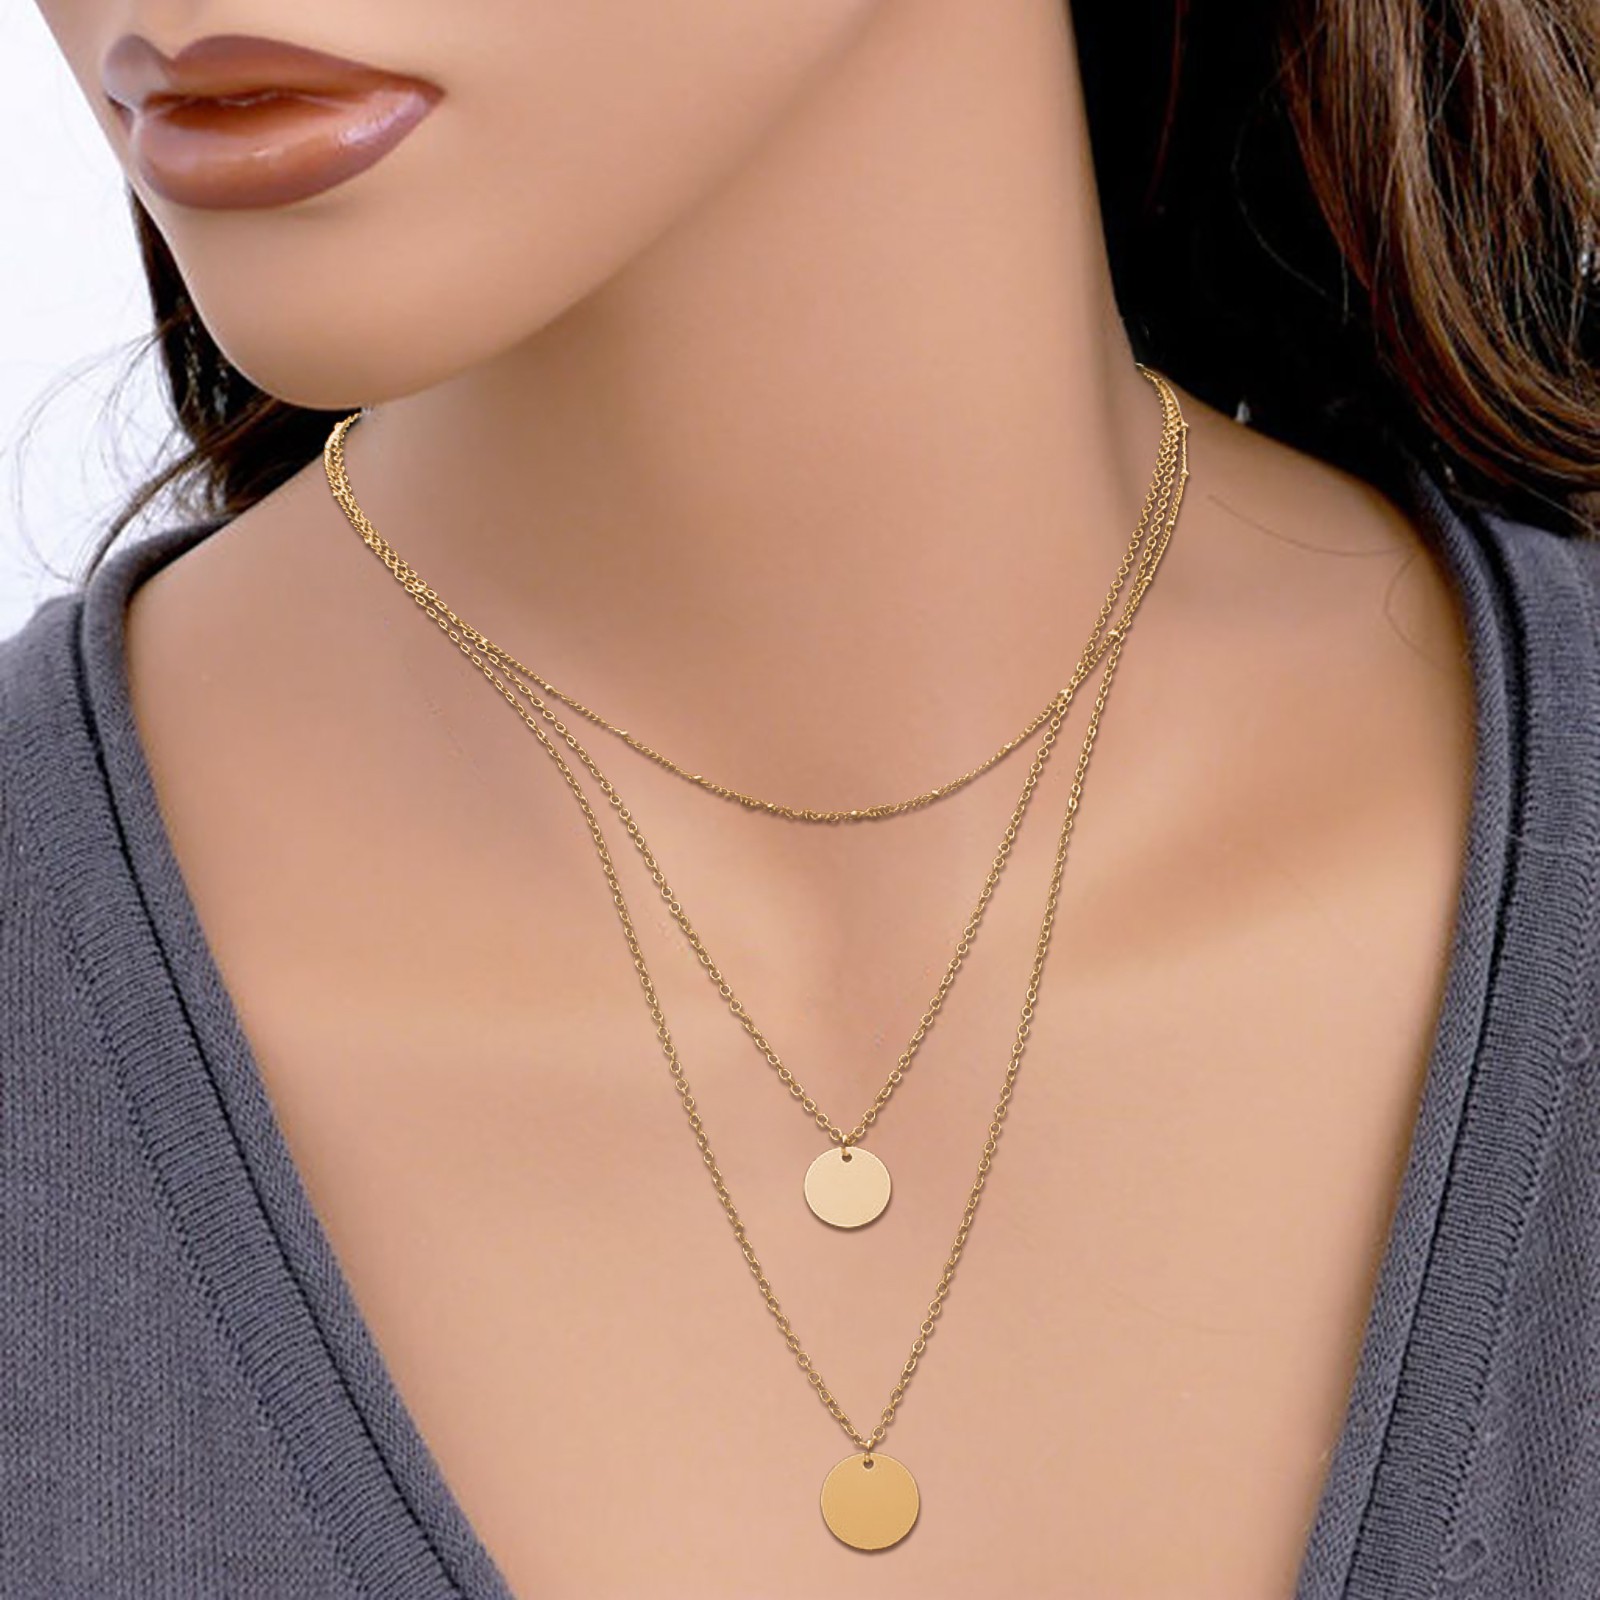 3 Layered Necklaces For Women, Layering Choker Necklace Handmade Layered  Coin Disc Necklace Jewelry For Women Girls Cute Necklaces For Teen Girls